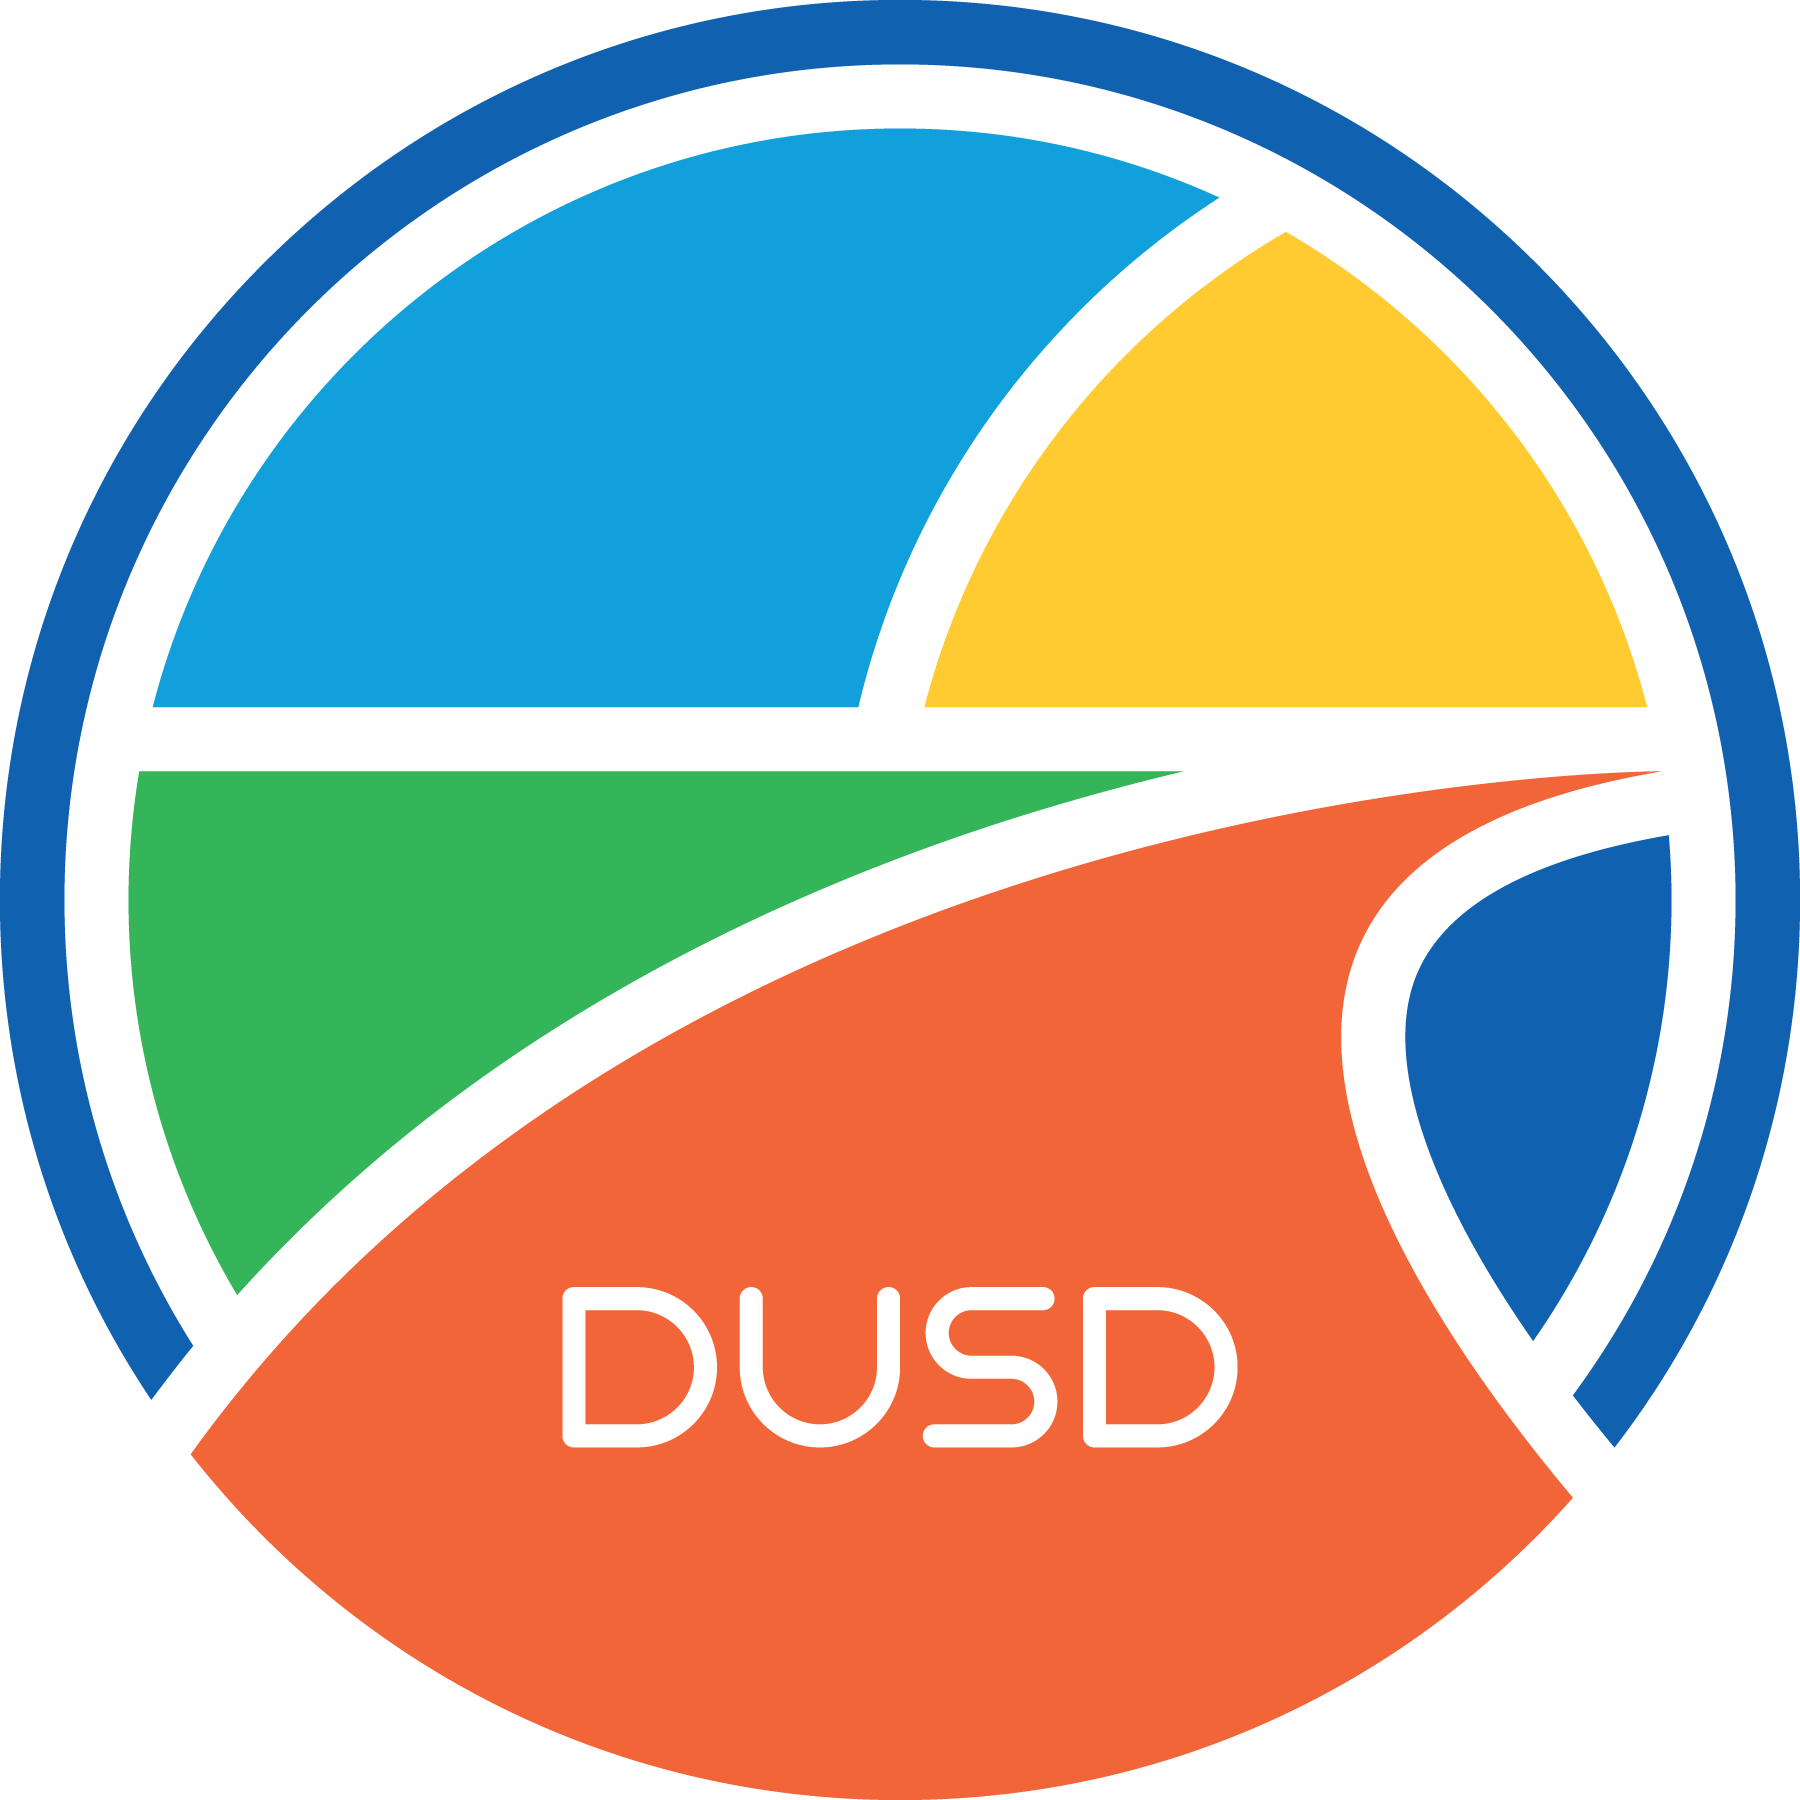 Images displays the Downey Unified School District logo.